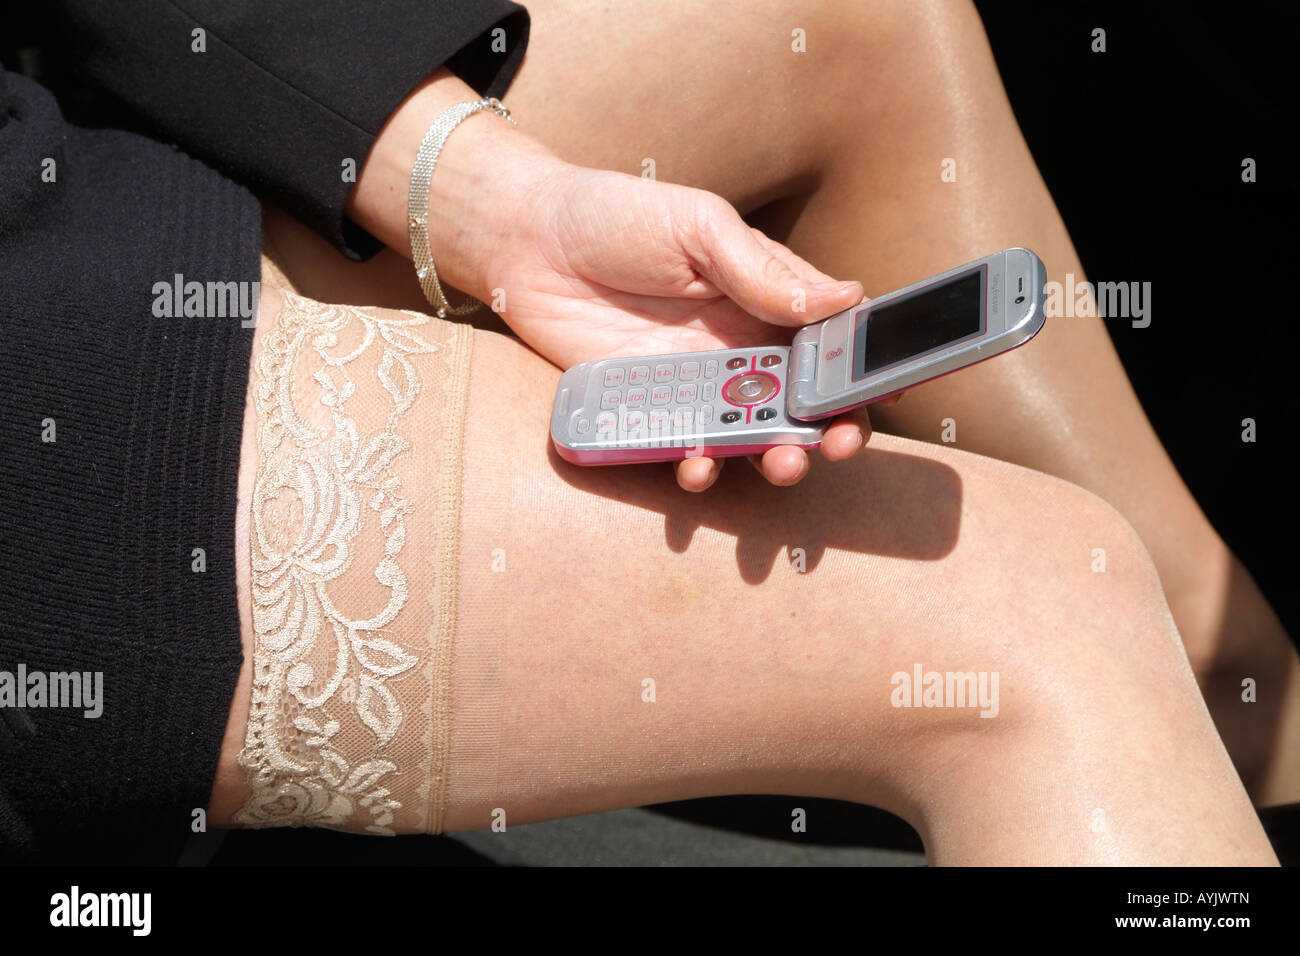 Mature Woman Stocking Tops and Mobile Phone Stock Photo - Alamy